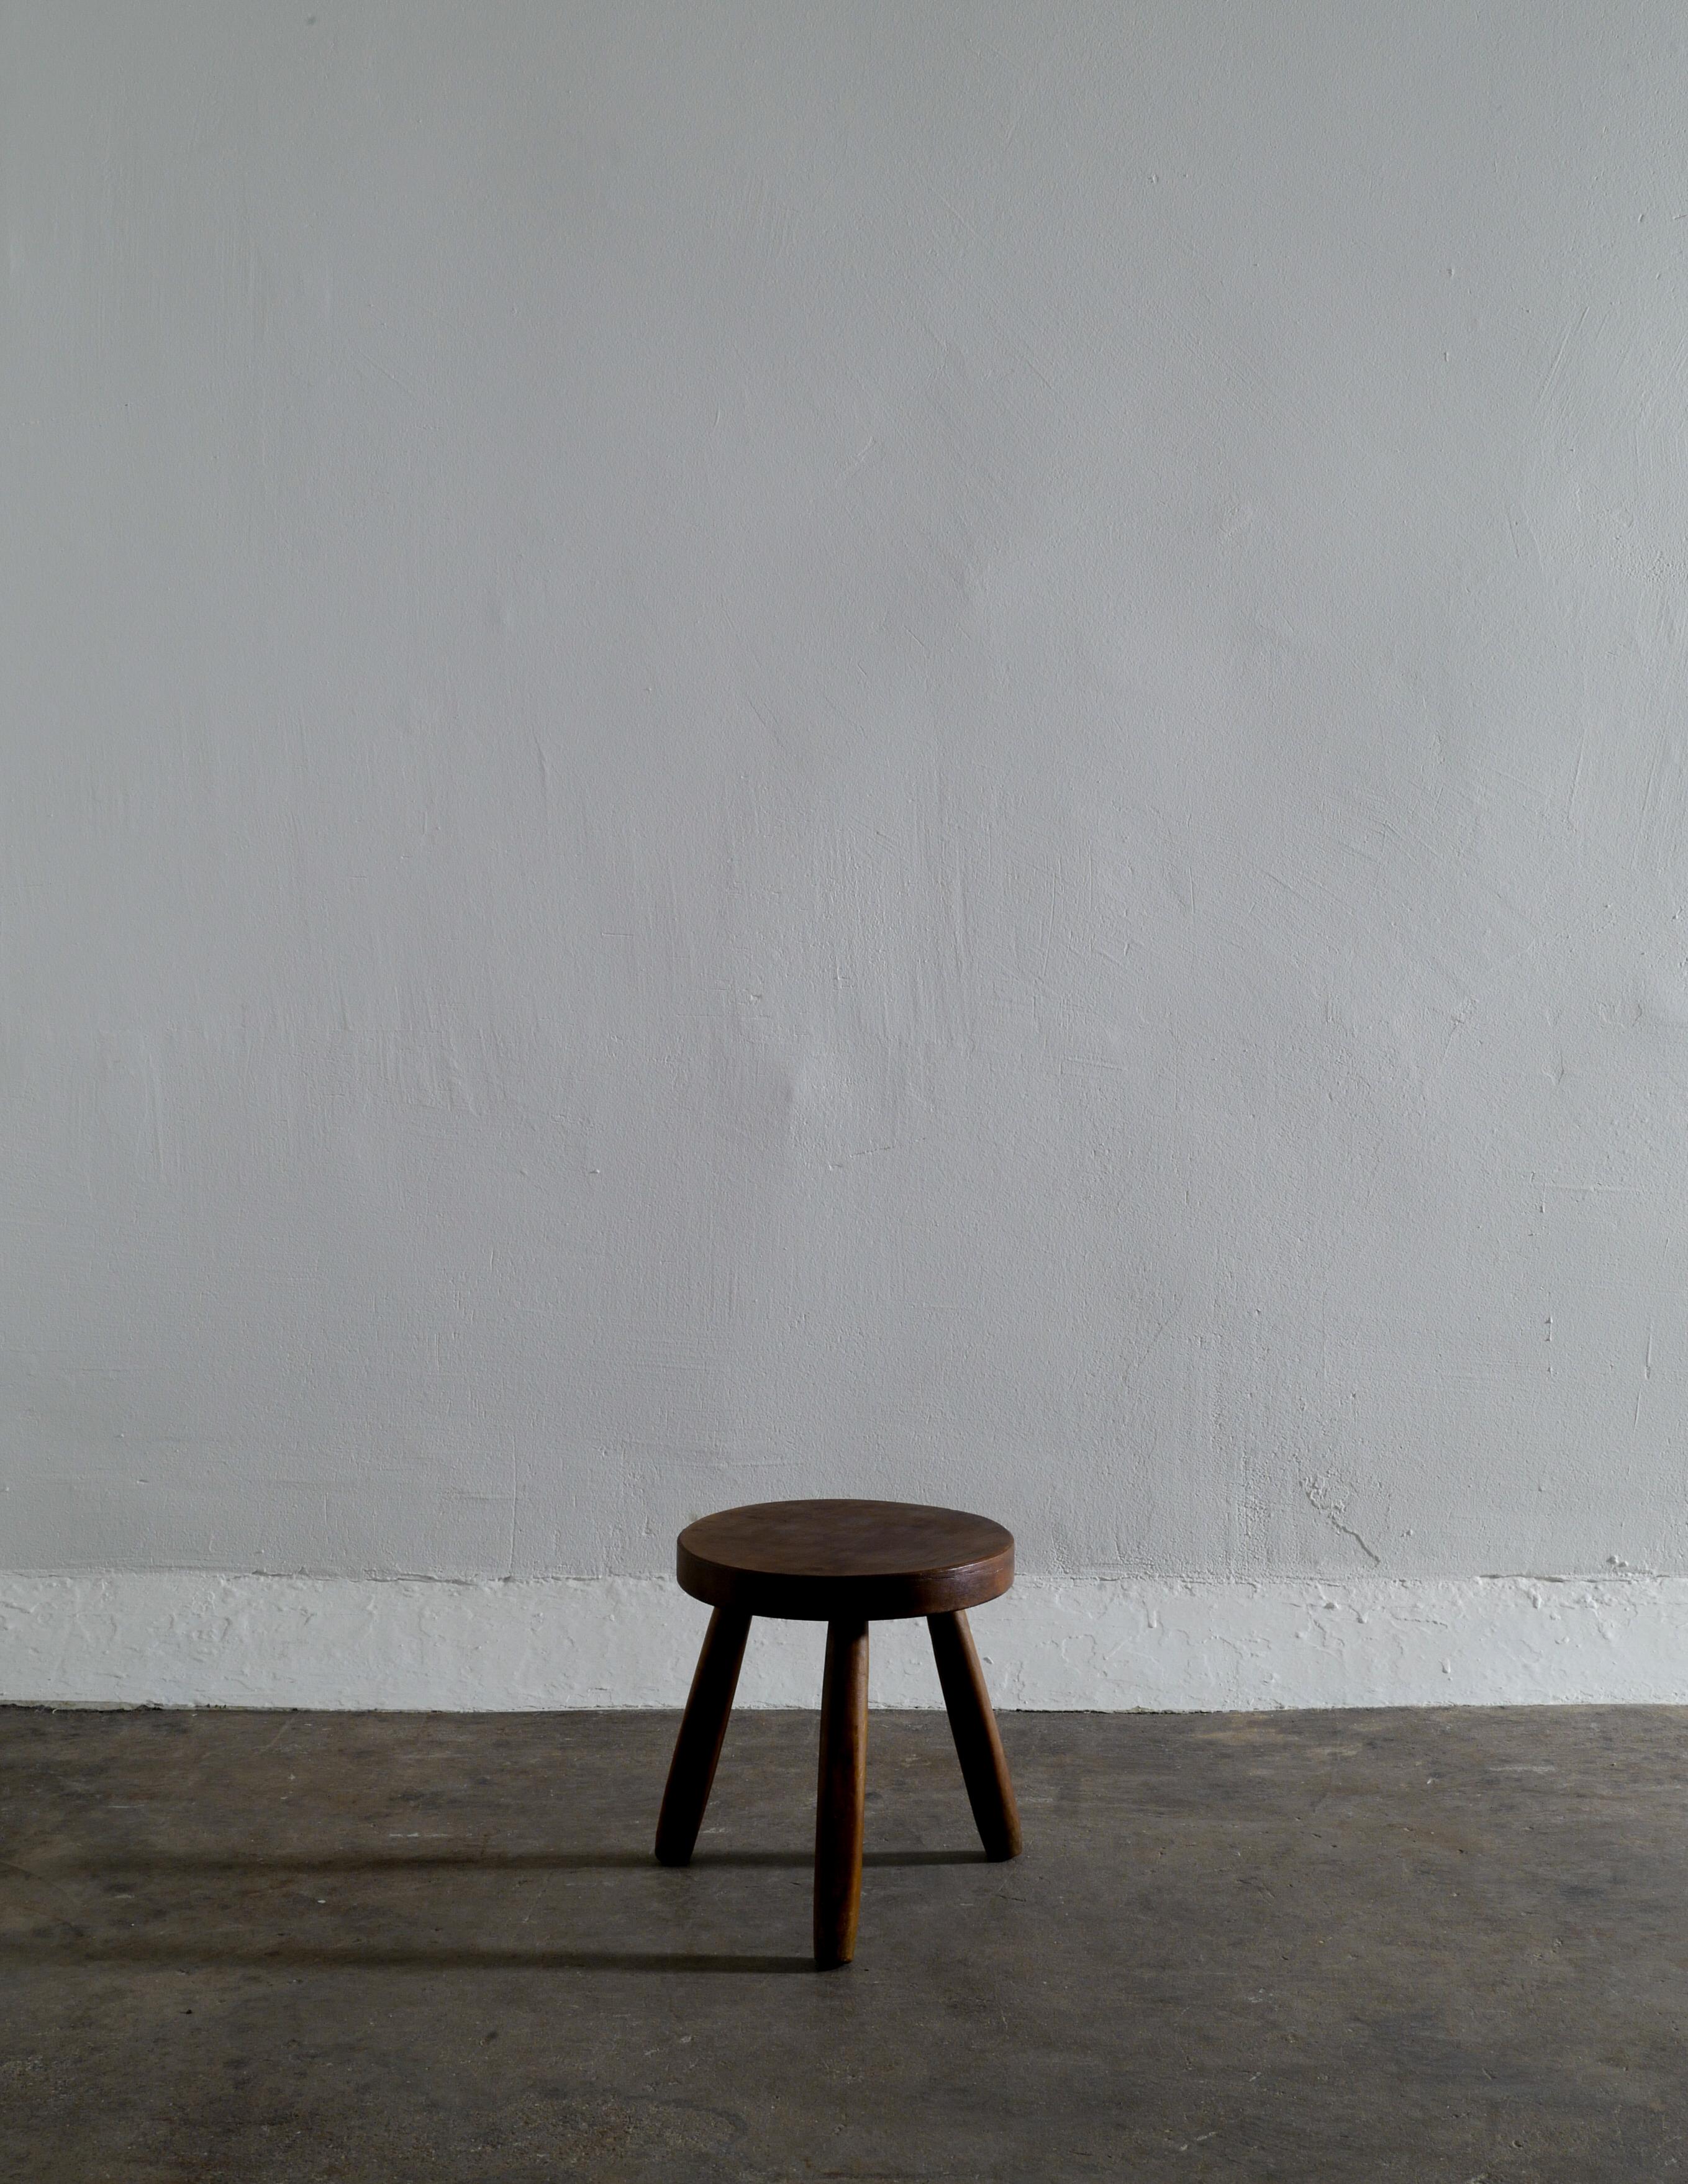 Rare and beautiful french milking tripod stool in solid elm produced by unknown designer in the 1960s. In good vintage condition and showing beautiful patina from age and use.